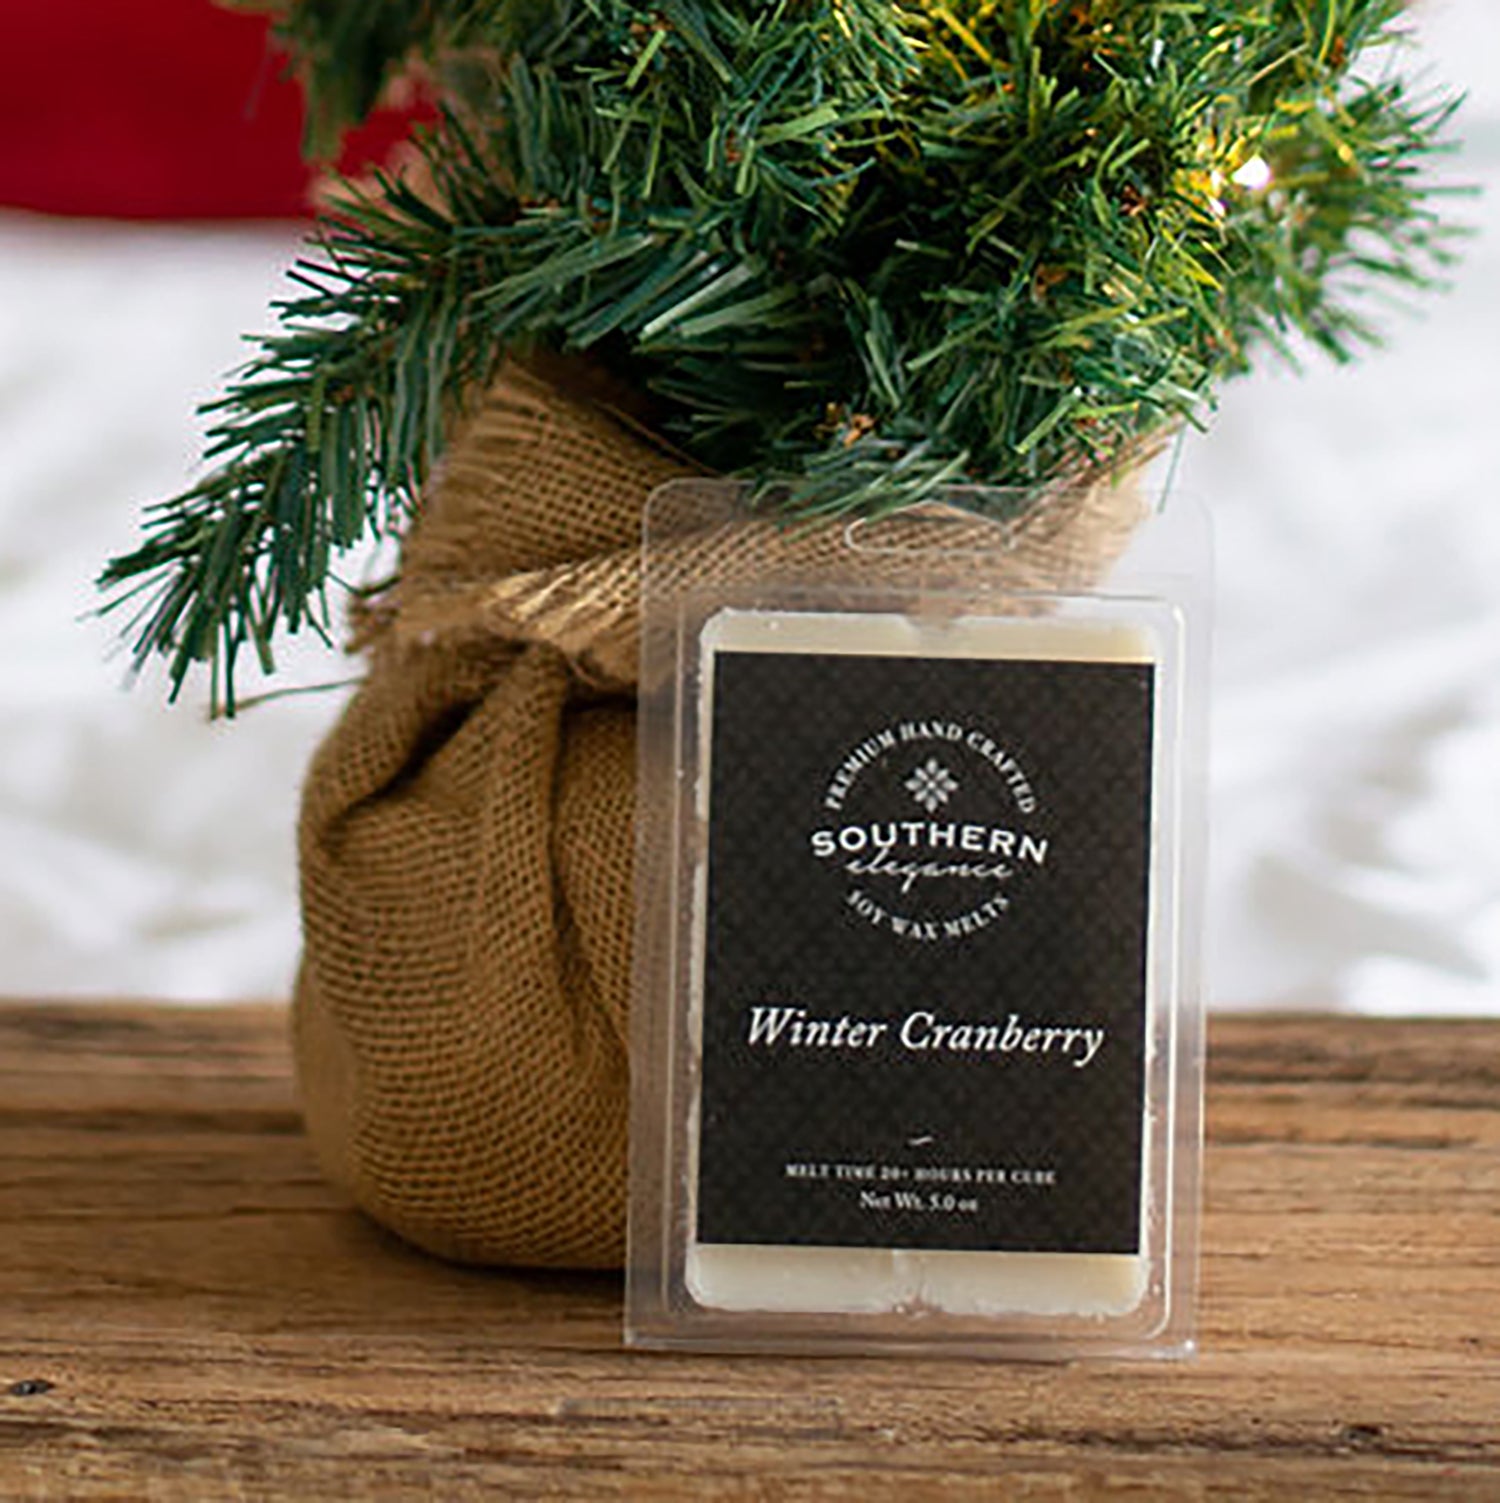 Christmas Tree Hill Wax Melts - Buttered Maple Syrup